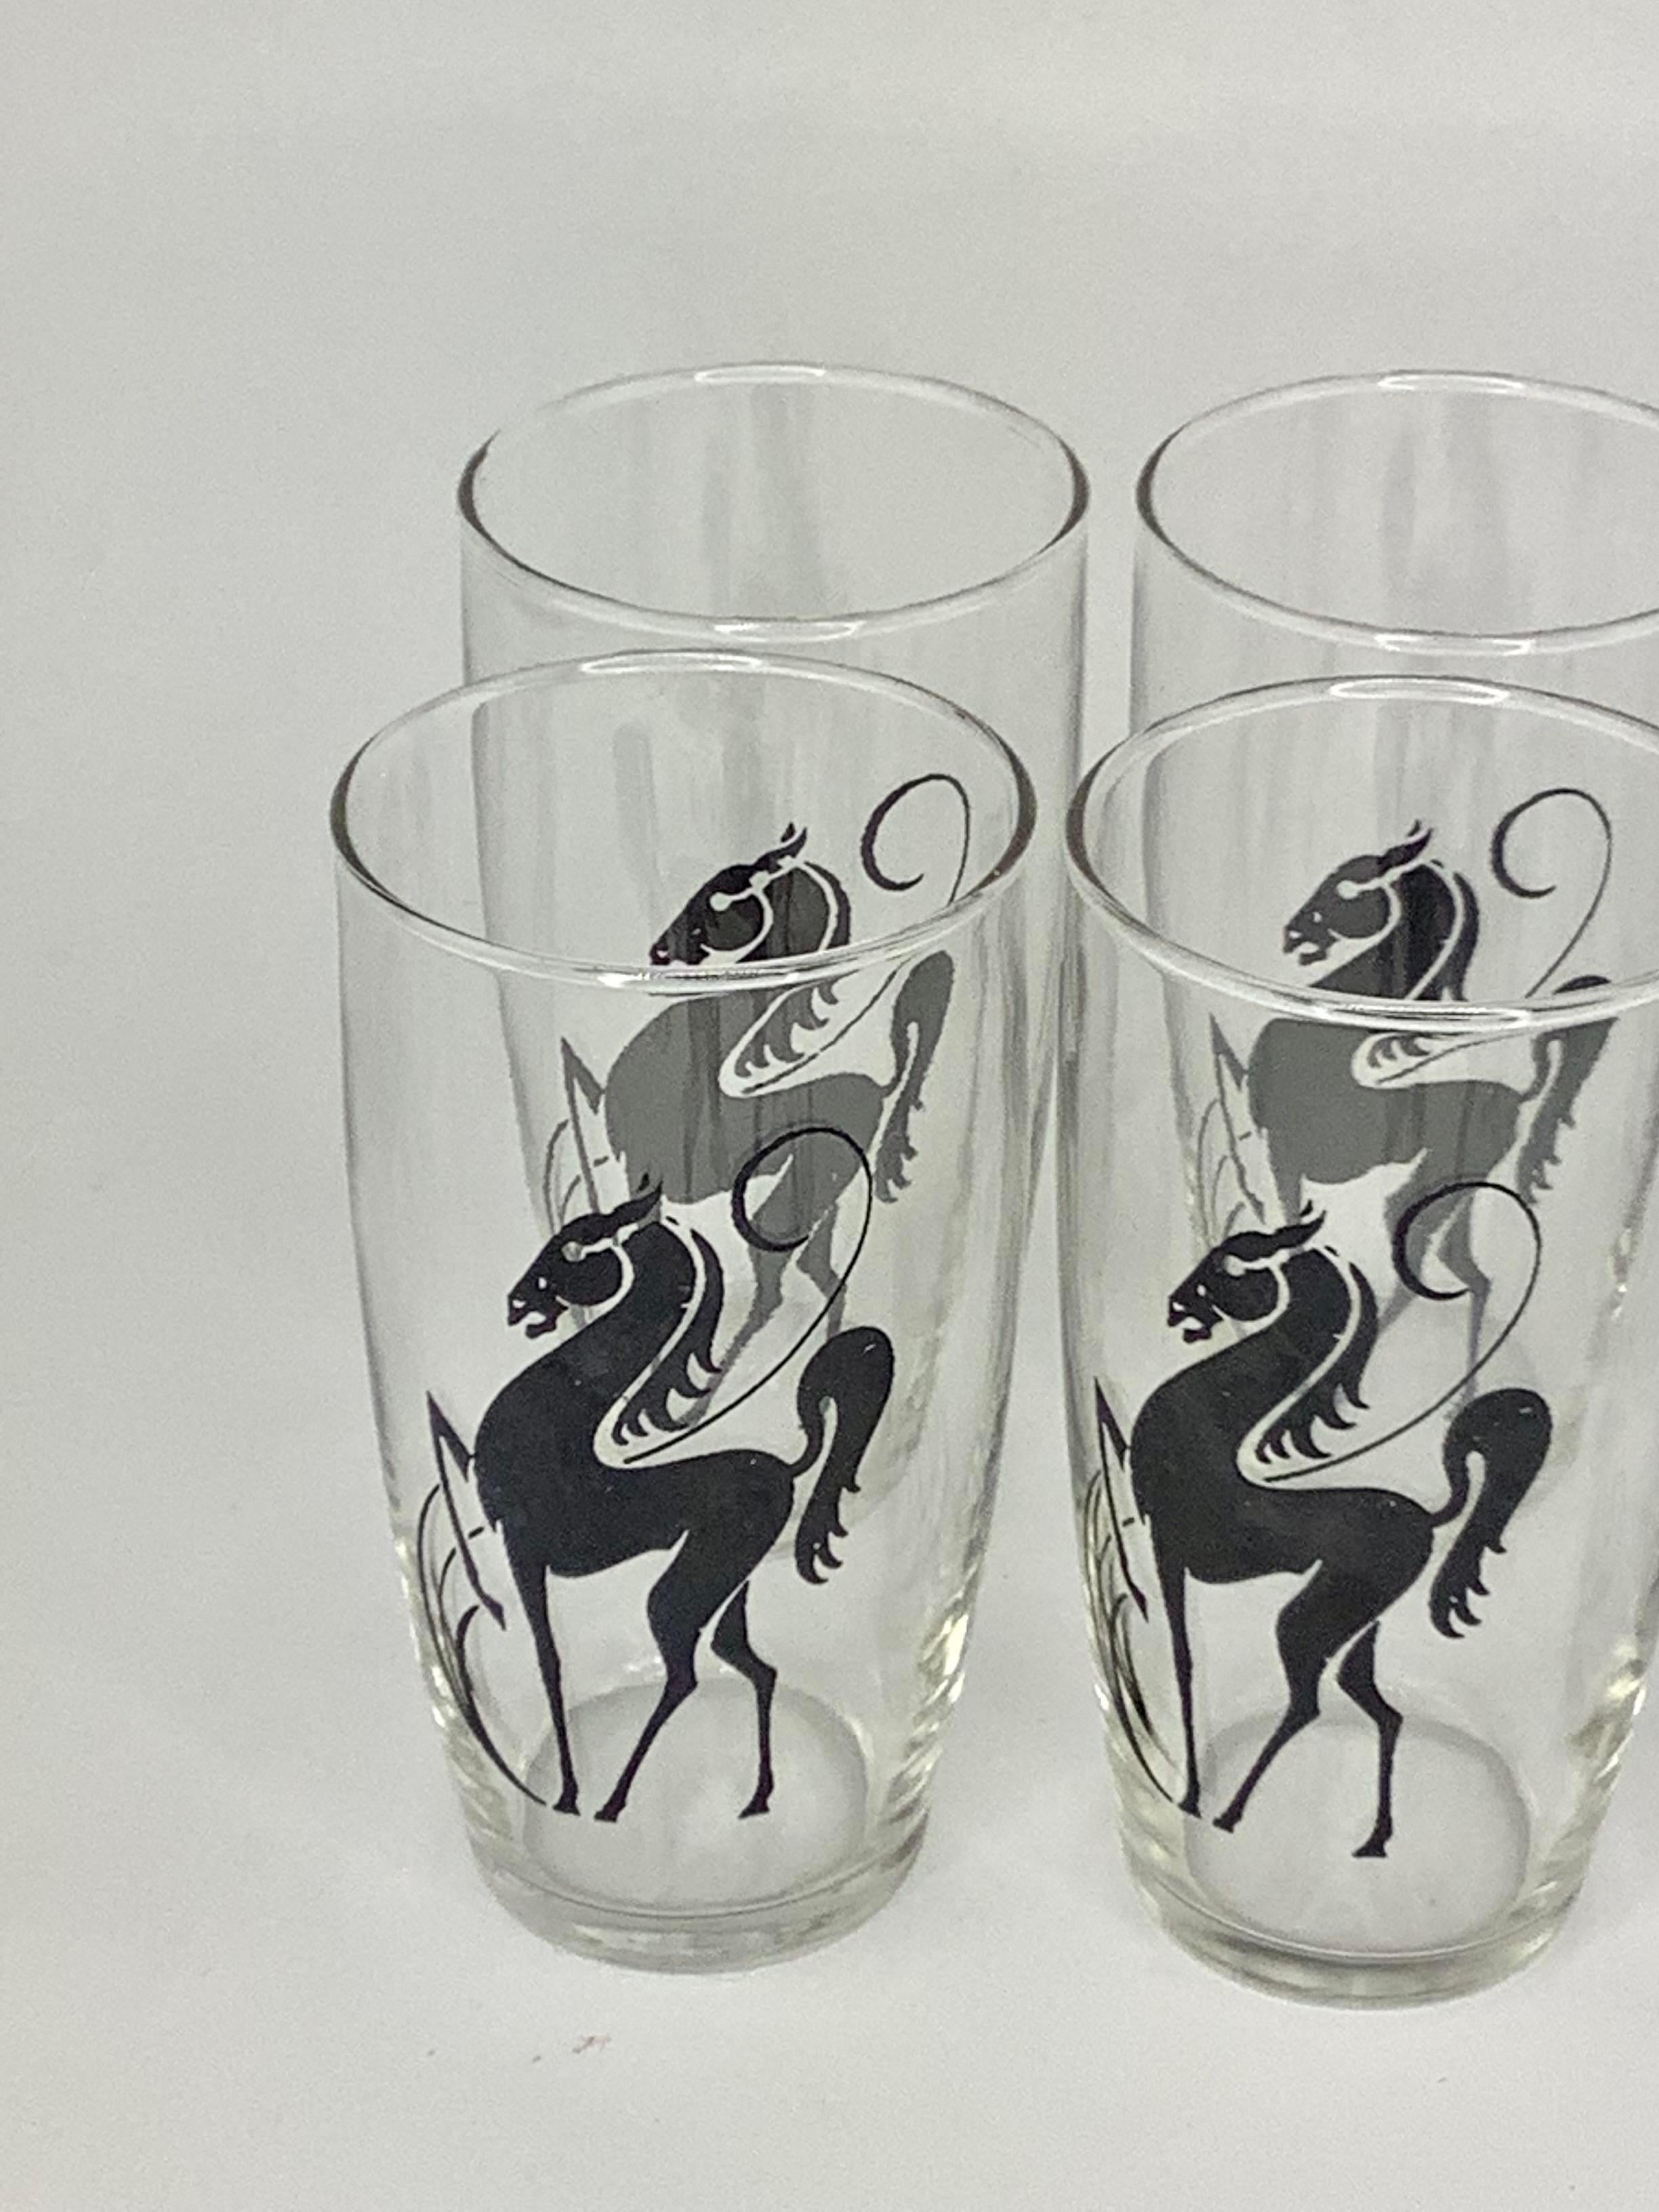 Set of 8 Vintage Prancing Horses Highball Glasses In Good Condition For Sale In Chapel Hill, NC